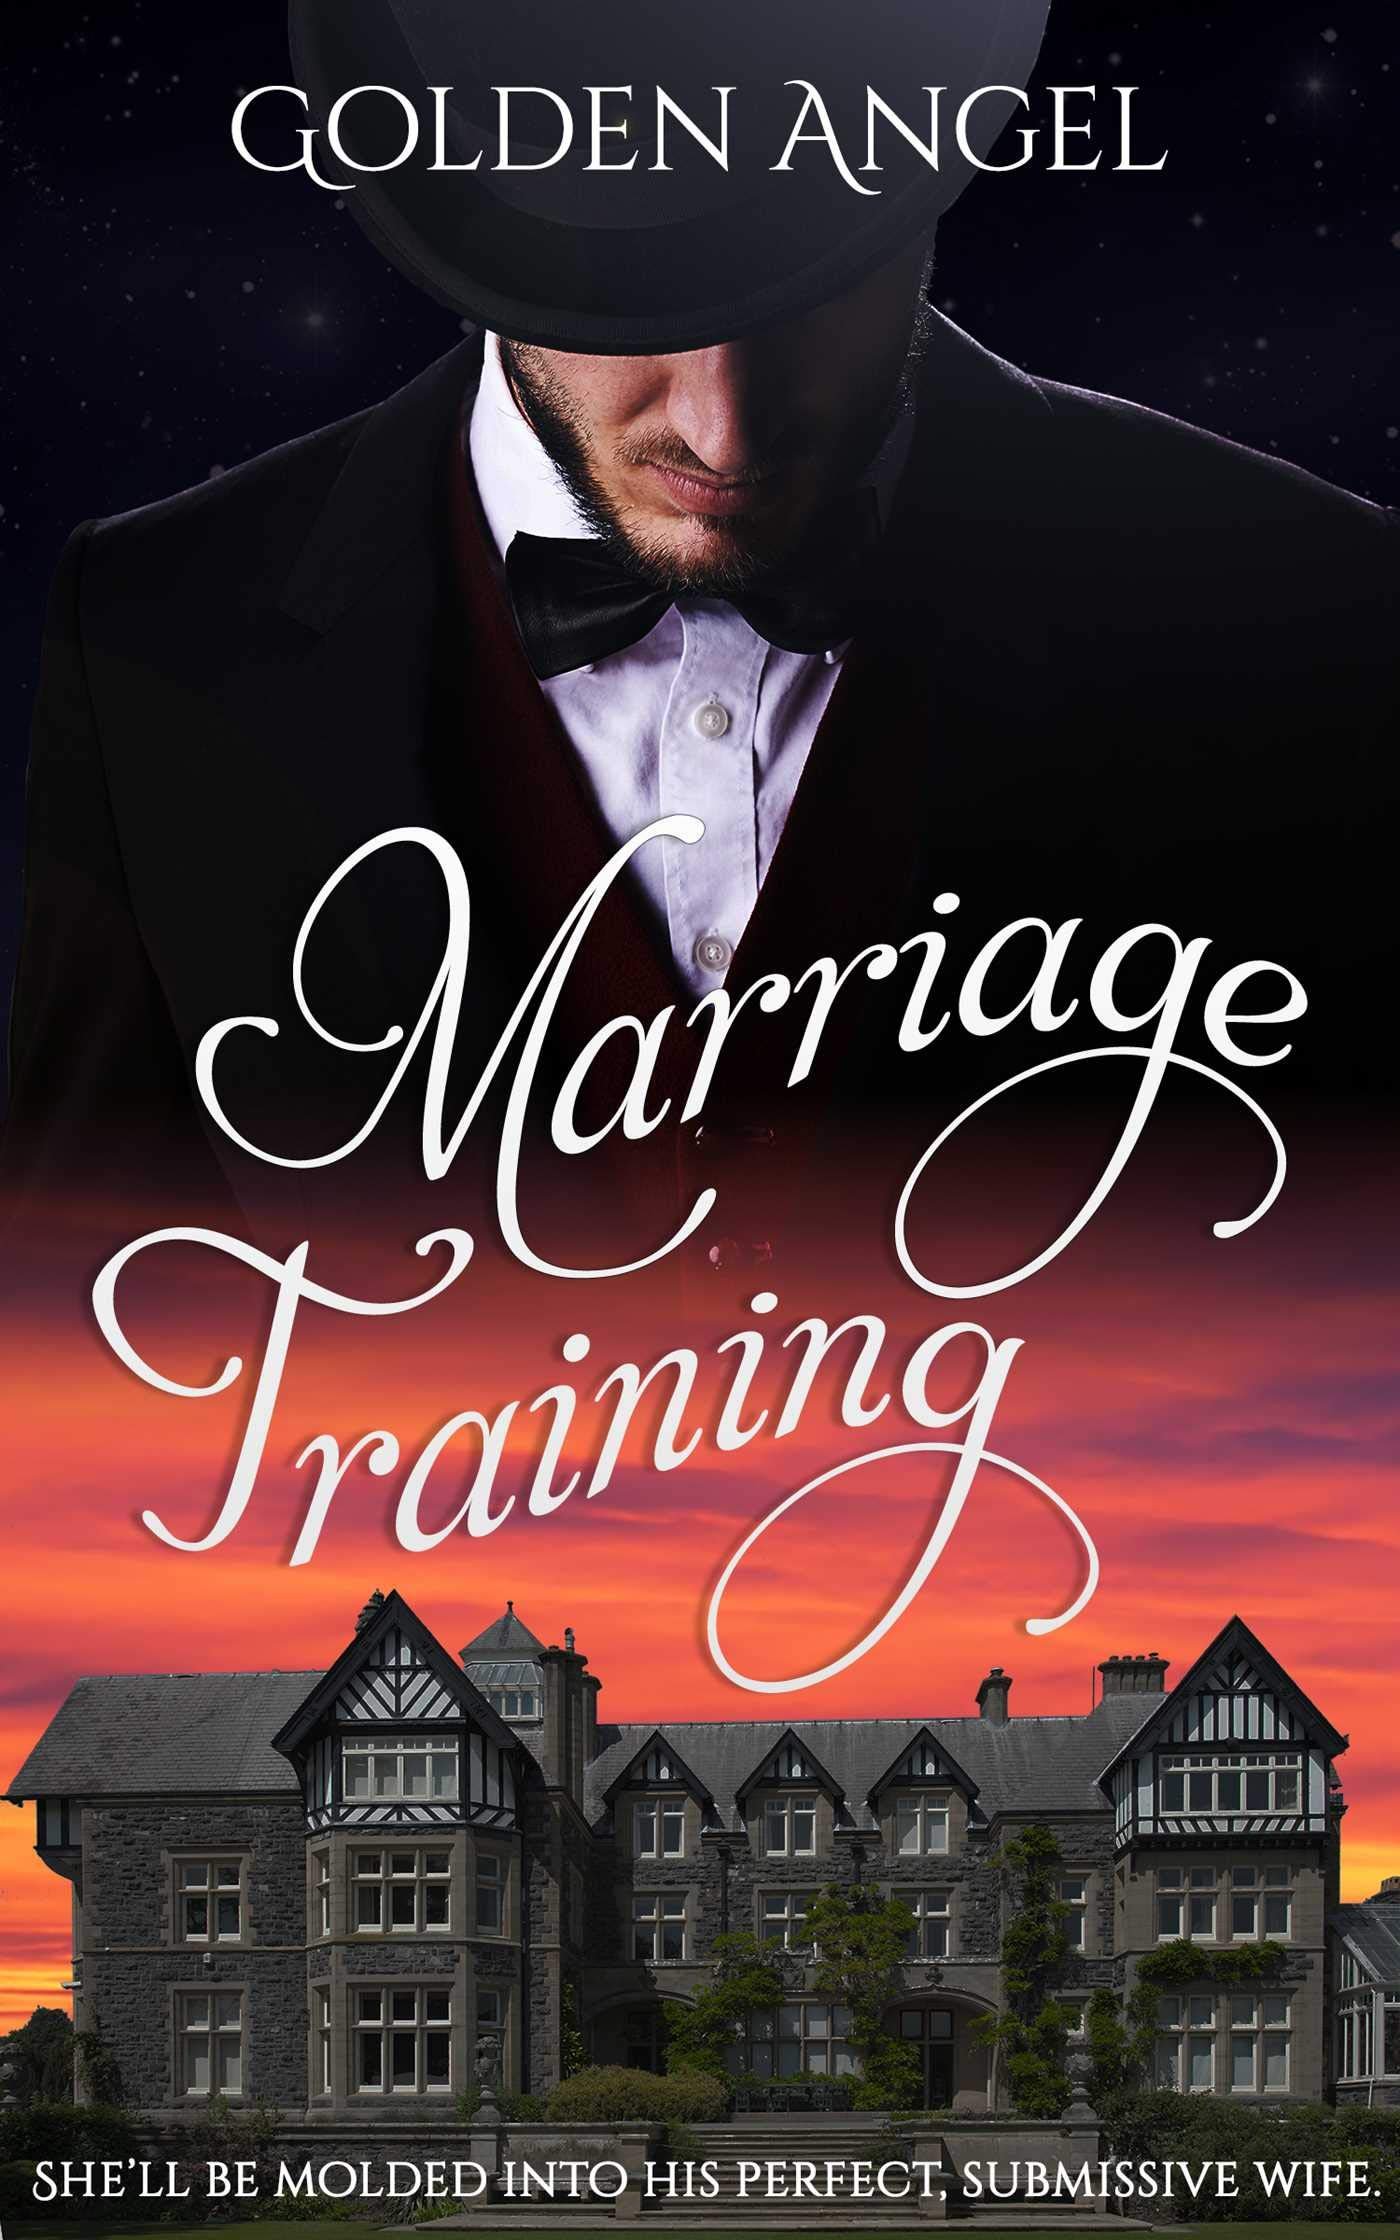 Set in Victorian England, this erotic BDSM novel features a courtship between a young woman and a dashing rake.